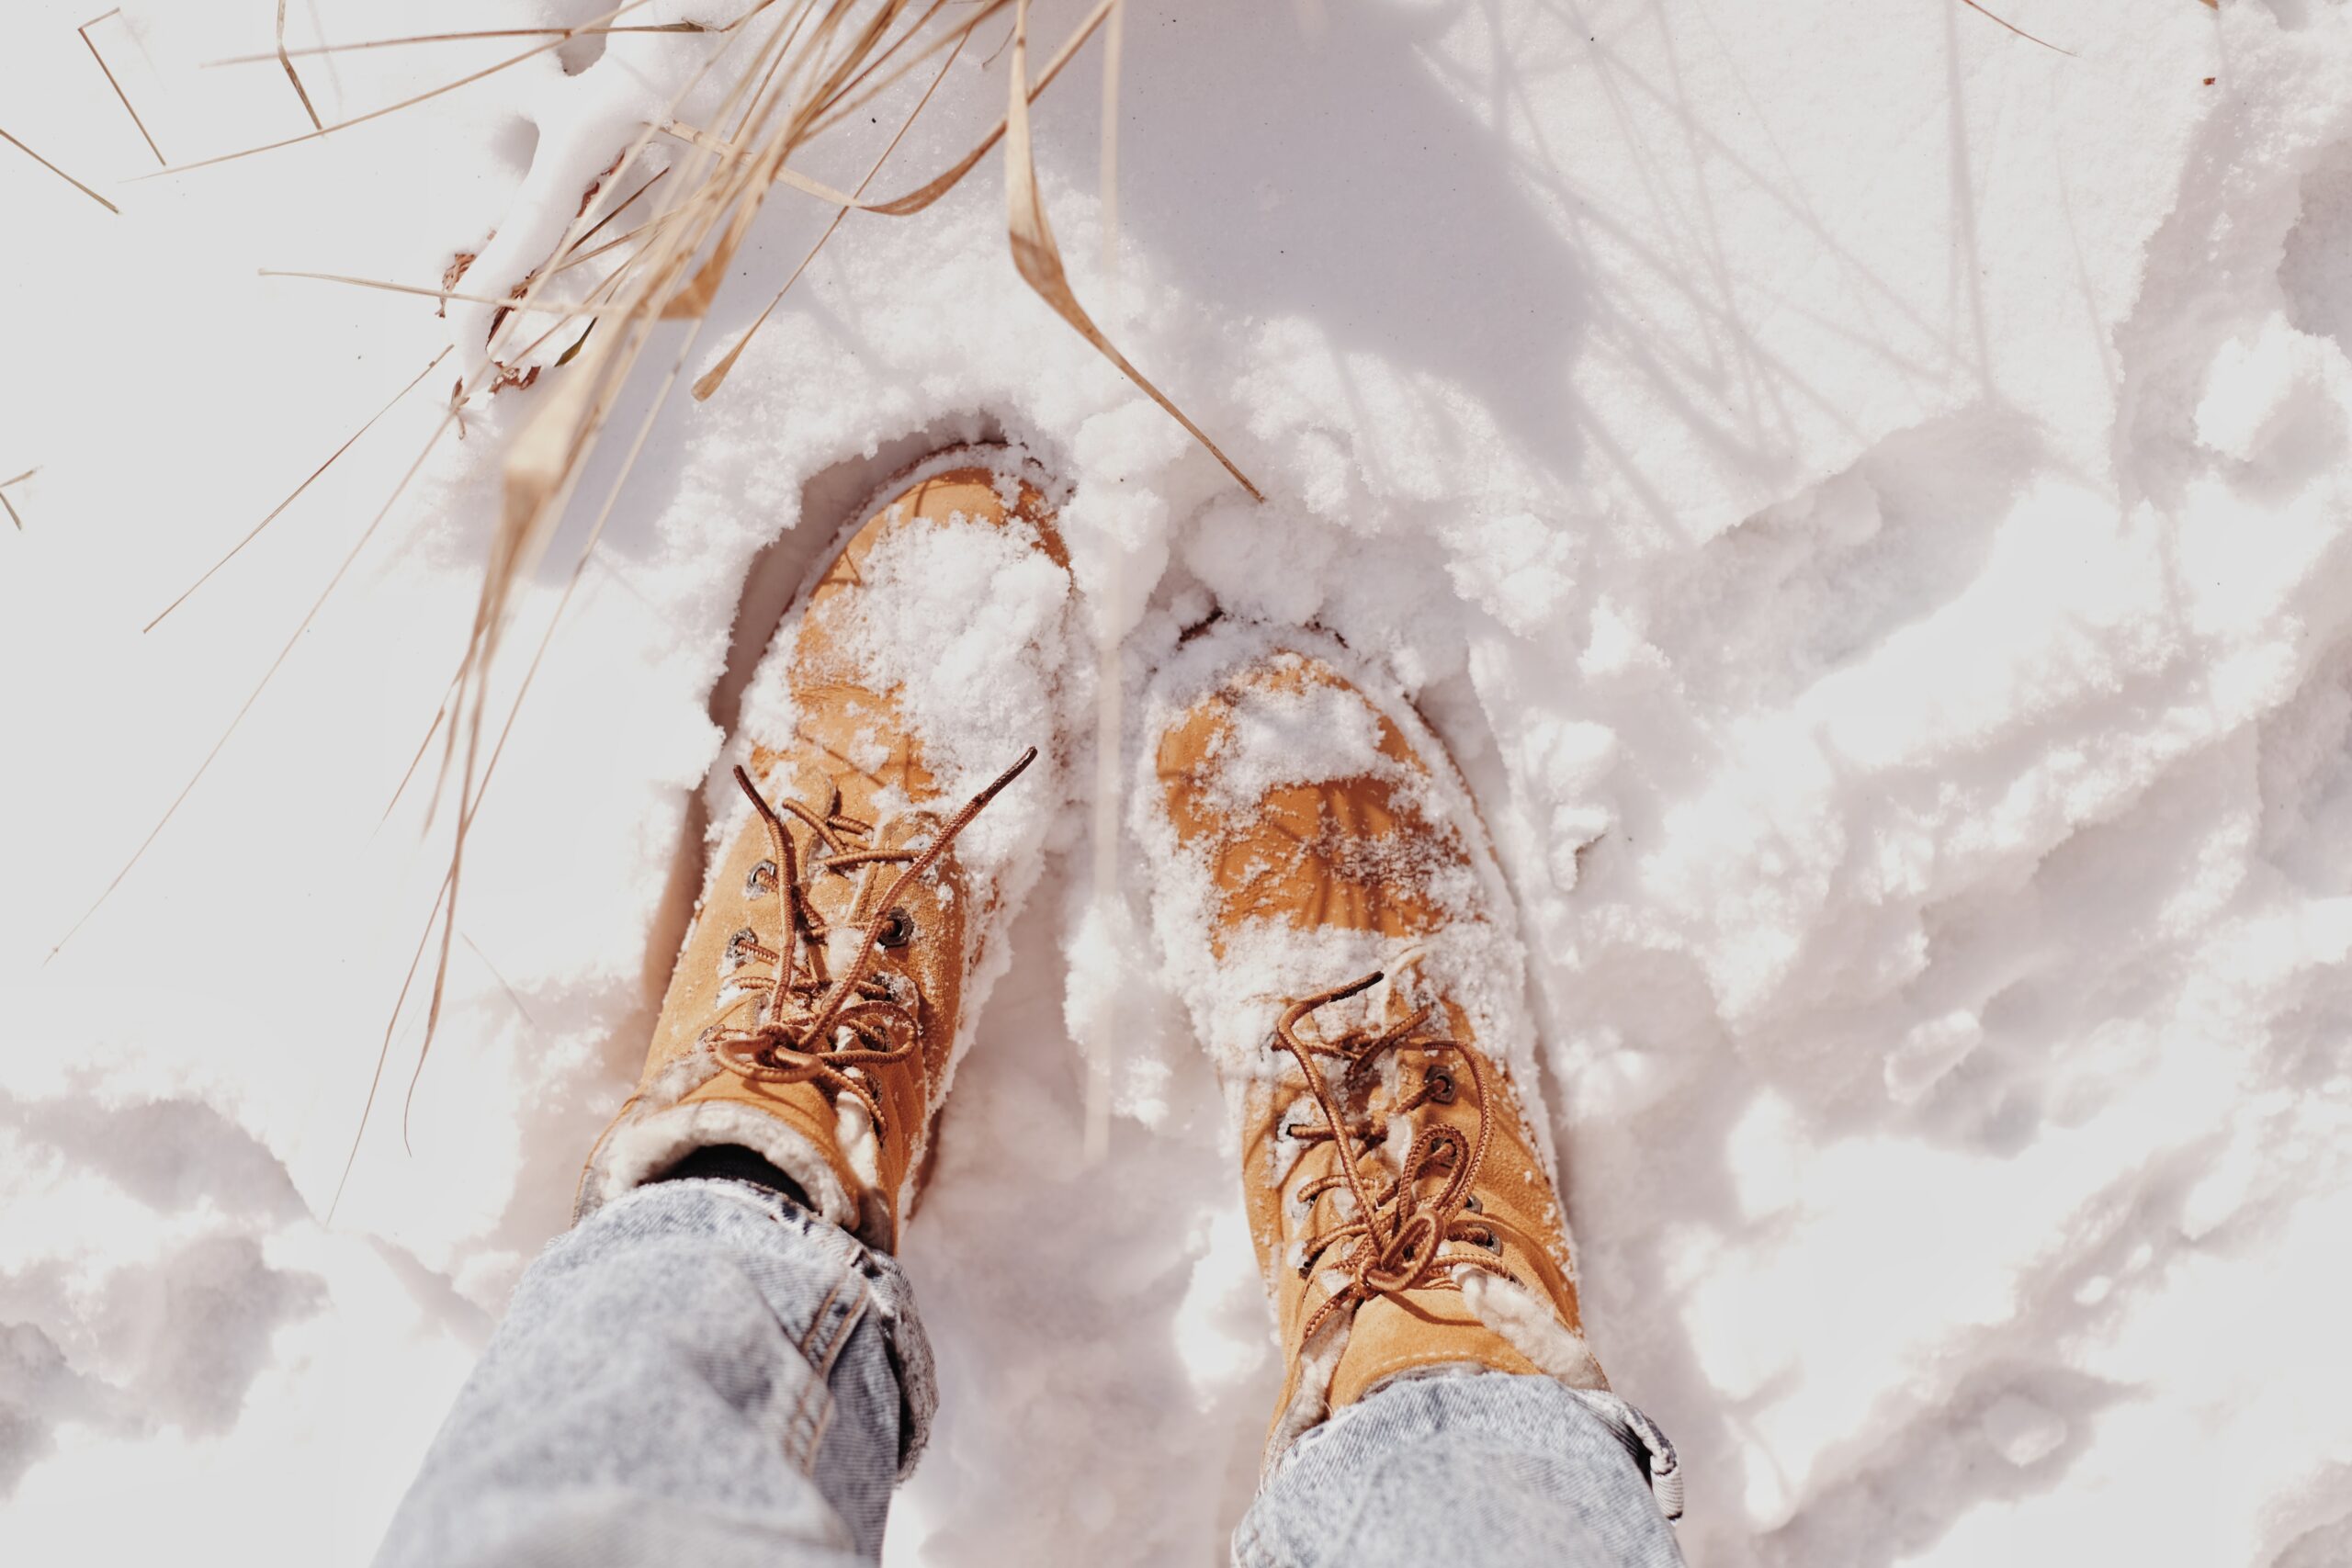 HD snow wallpapers, winter images & pictures, sunny, travel images, walking, shoes, season, cold, apparel, clothing, nature images, outdoors, footwear, brown backgrounds, ice, shoe, human, people images & pictures, boot, backgrounds